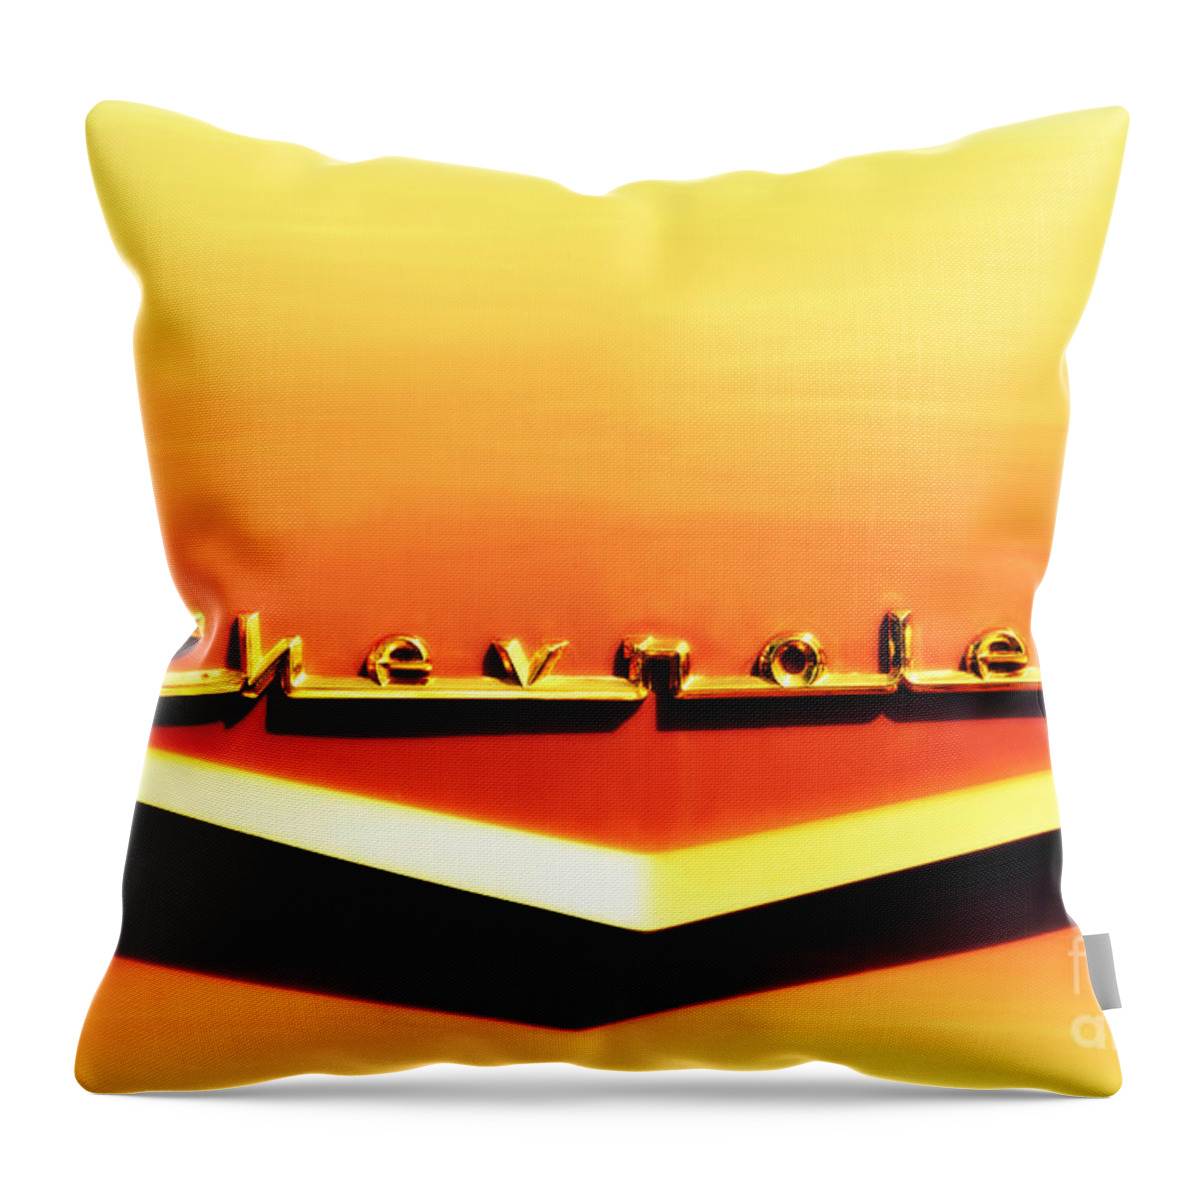 Chevrolet Throw Pillow featuring the photograph Chevrolet by Susanne Van Hulst